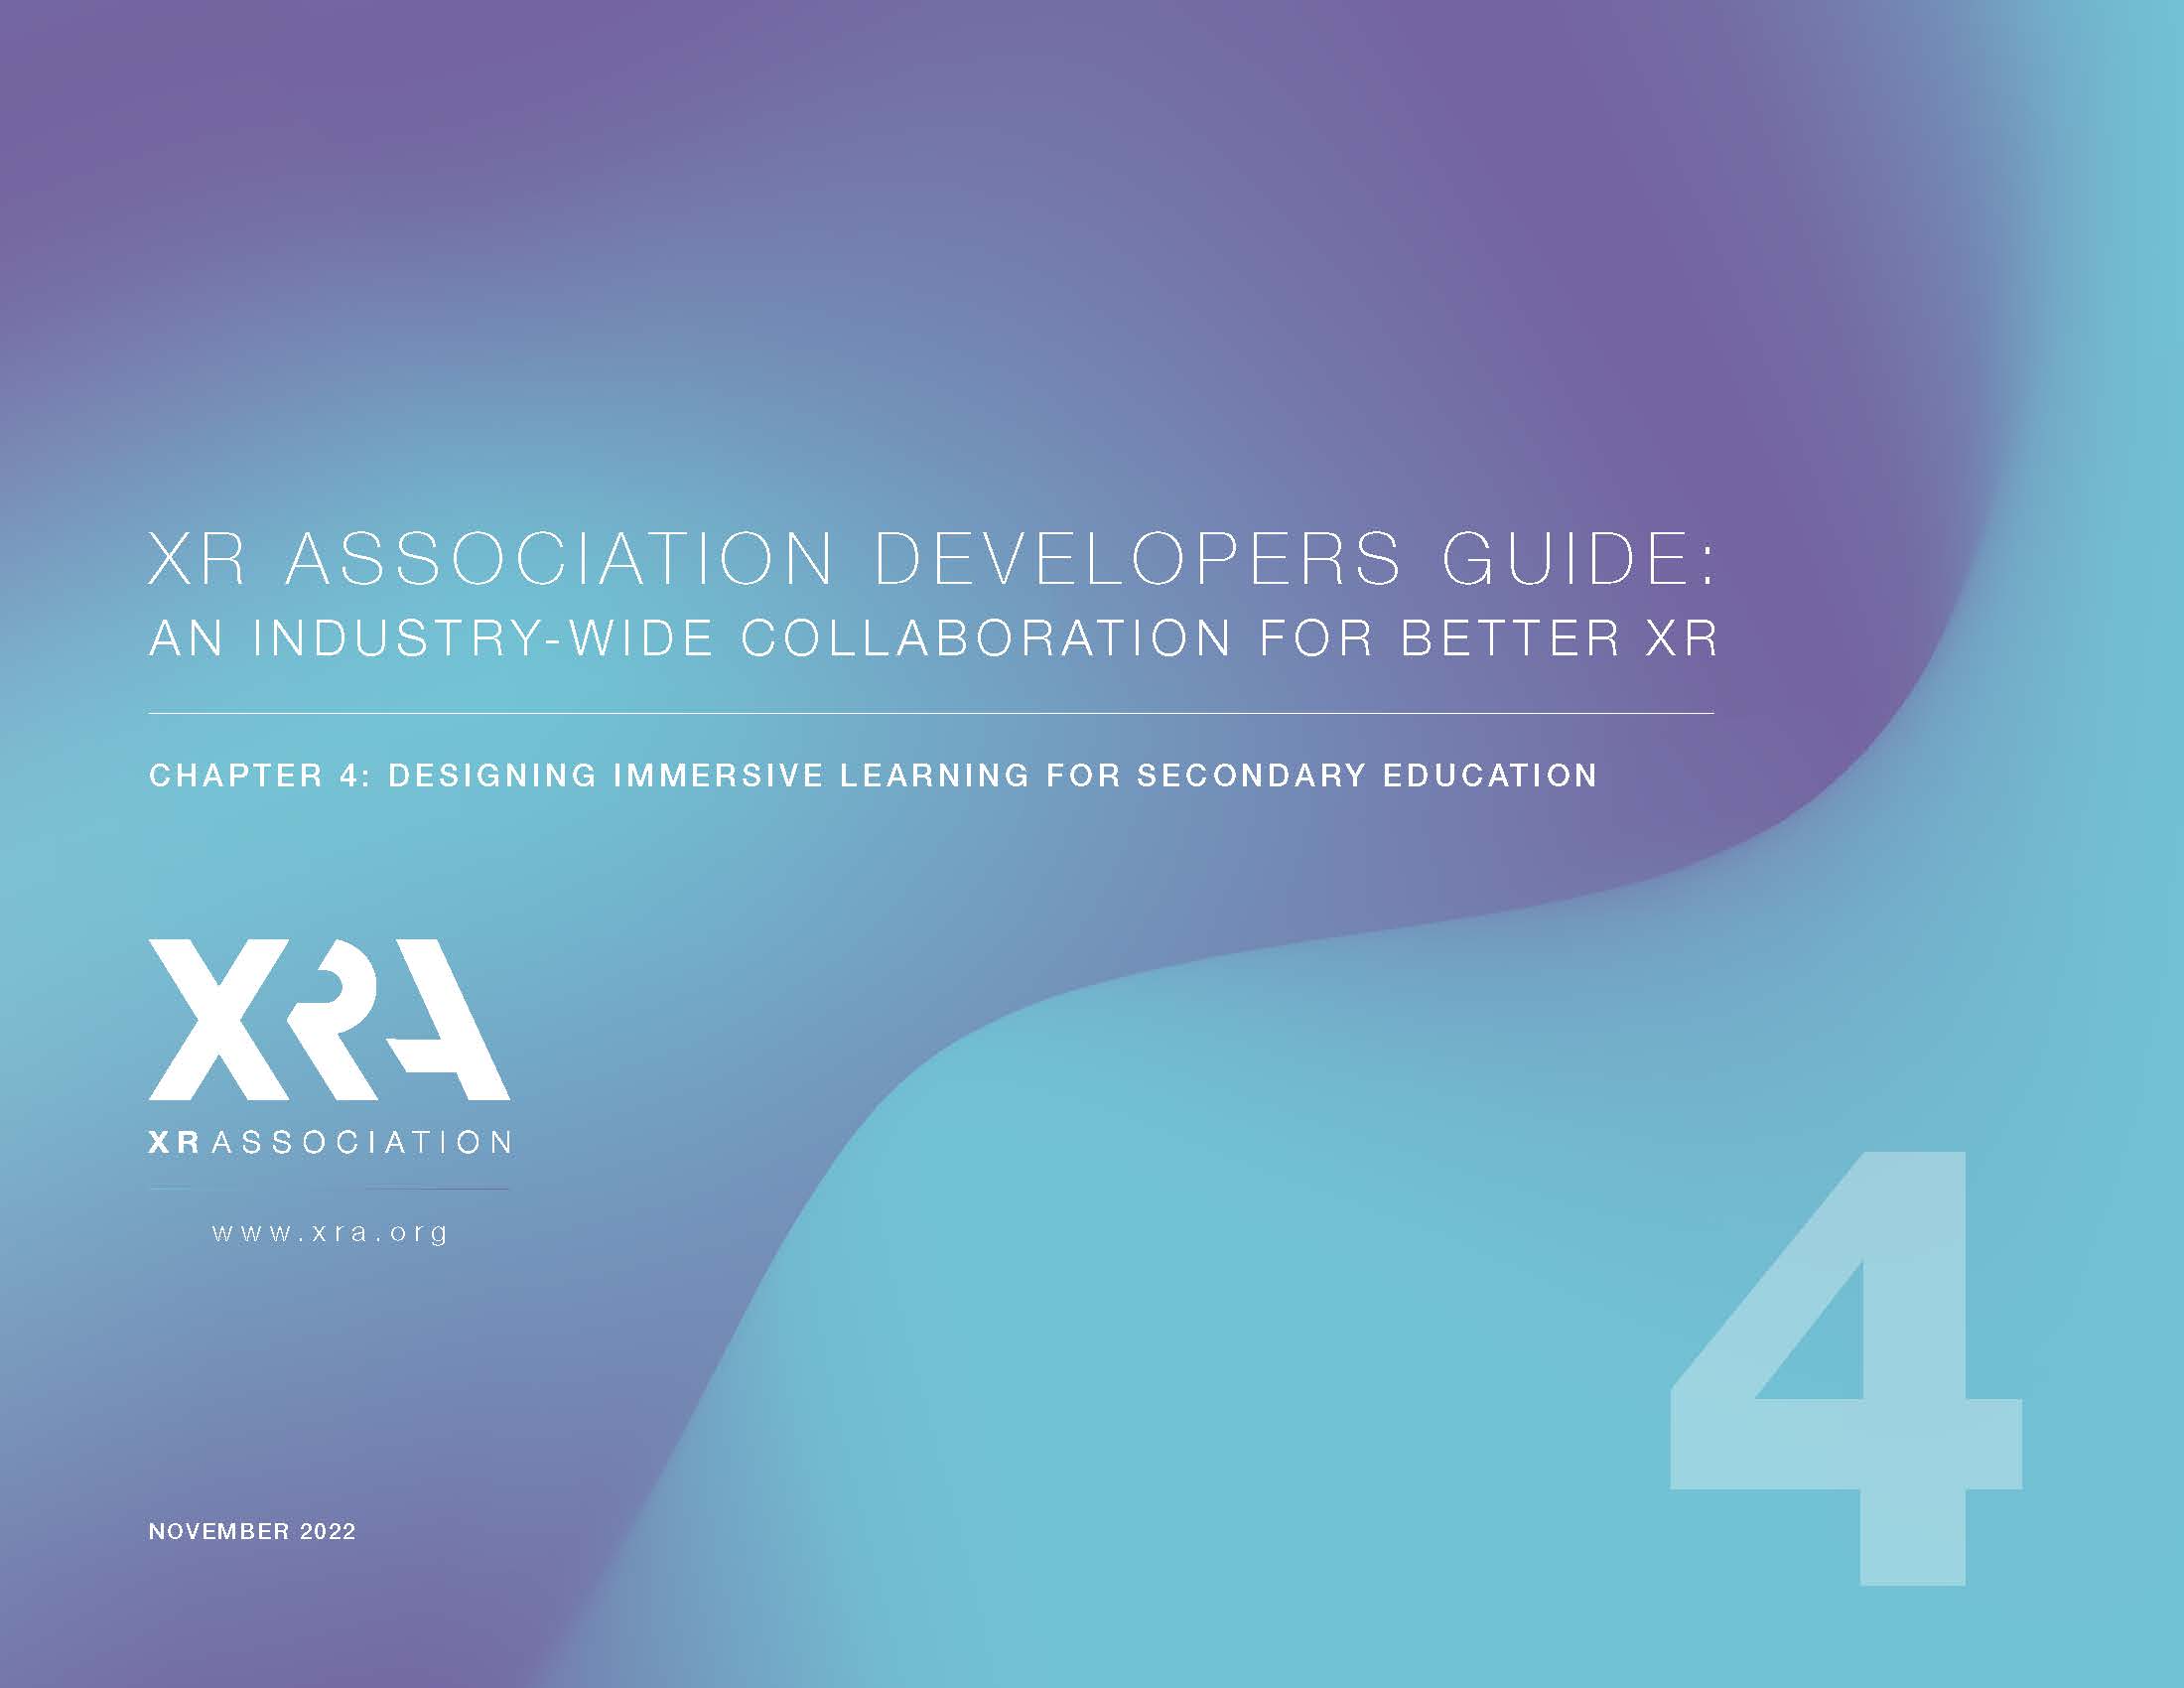 XR ASSOCIATION RELEASES FOURTH CHAPTER OF DEVELOPERS GUIDE FOCUSED ON EDUCATION